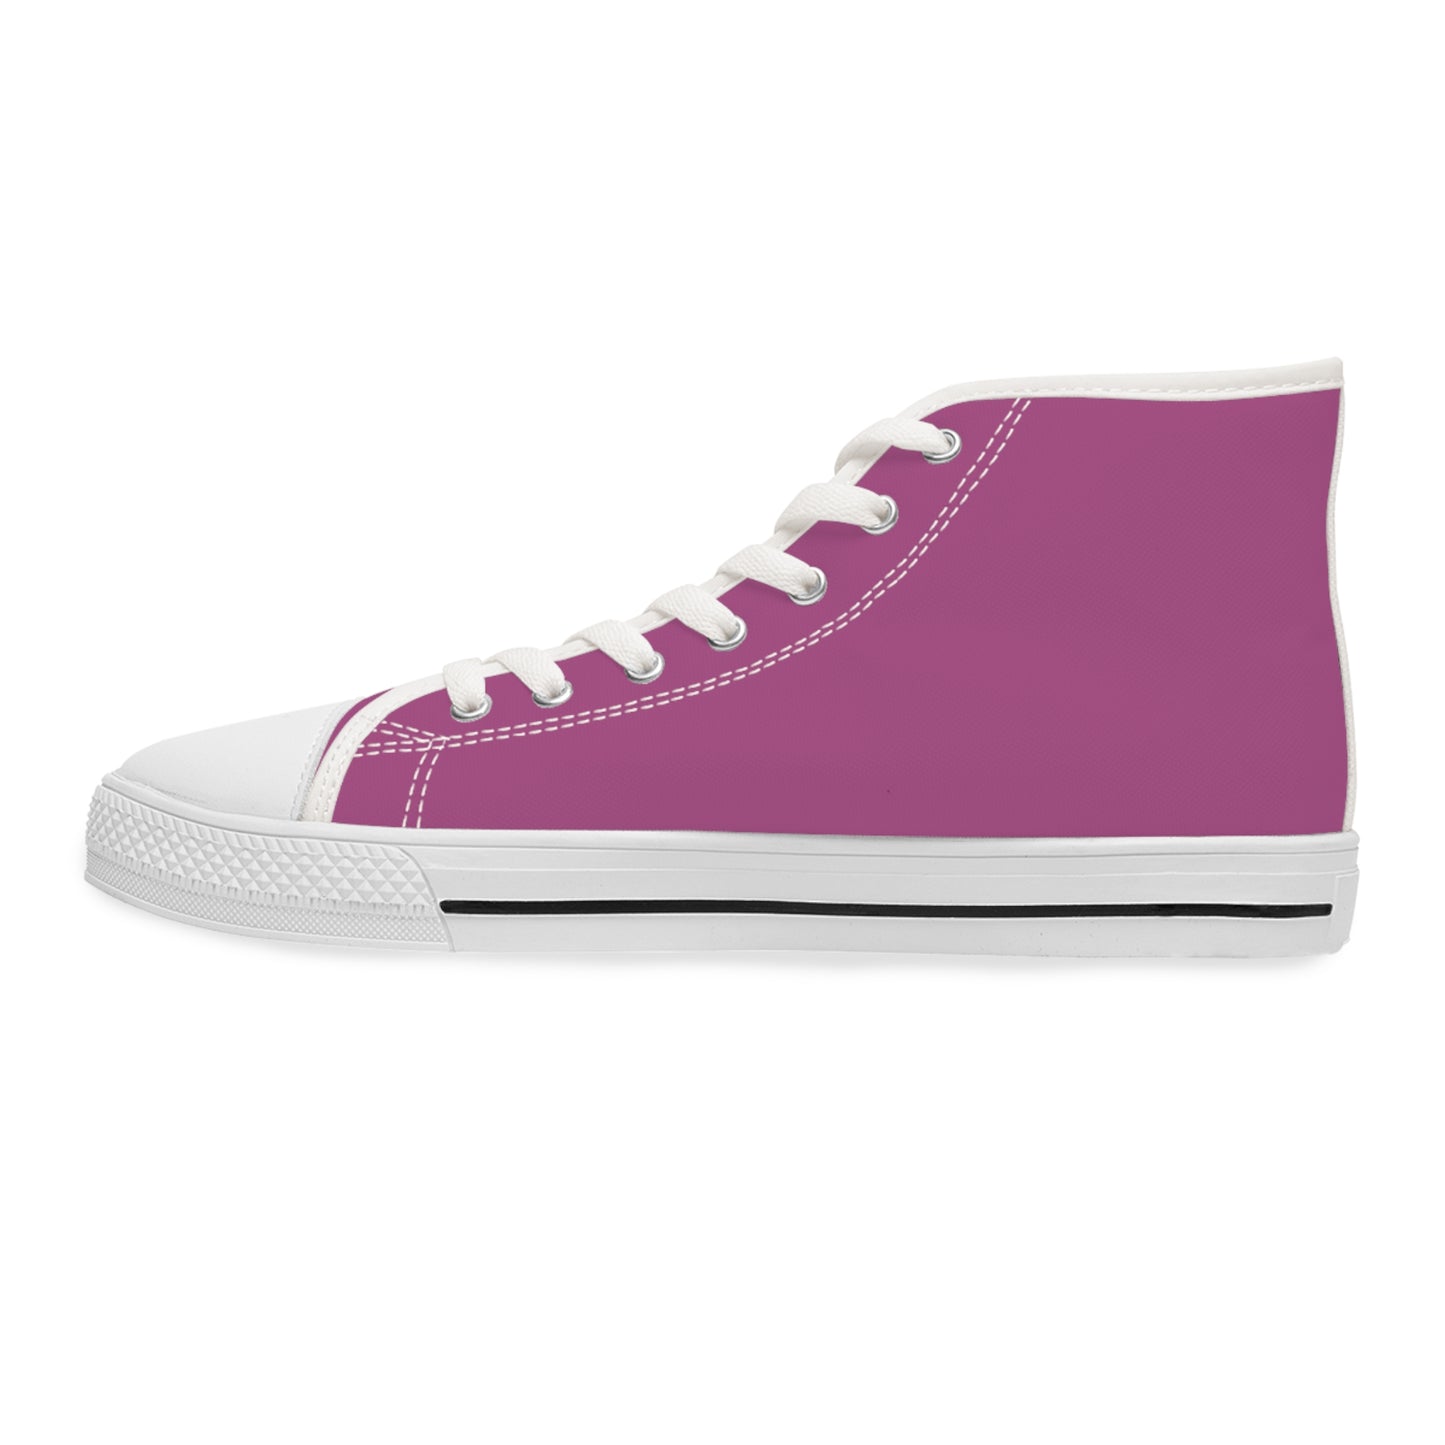 Women's Canvas High Top Solid Color Sneakers - Candy Wrapper Pink US 12 White sole